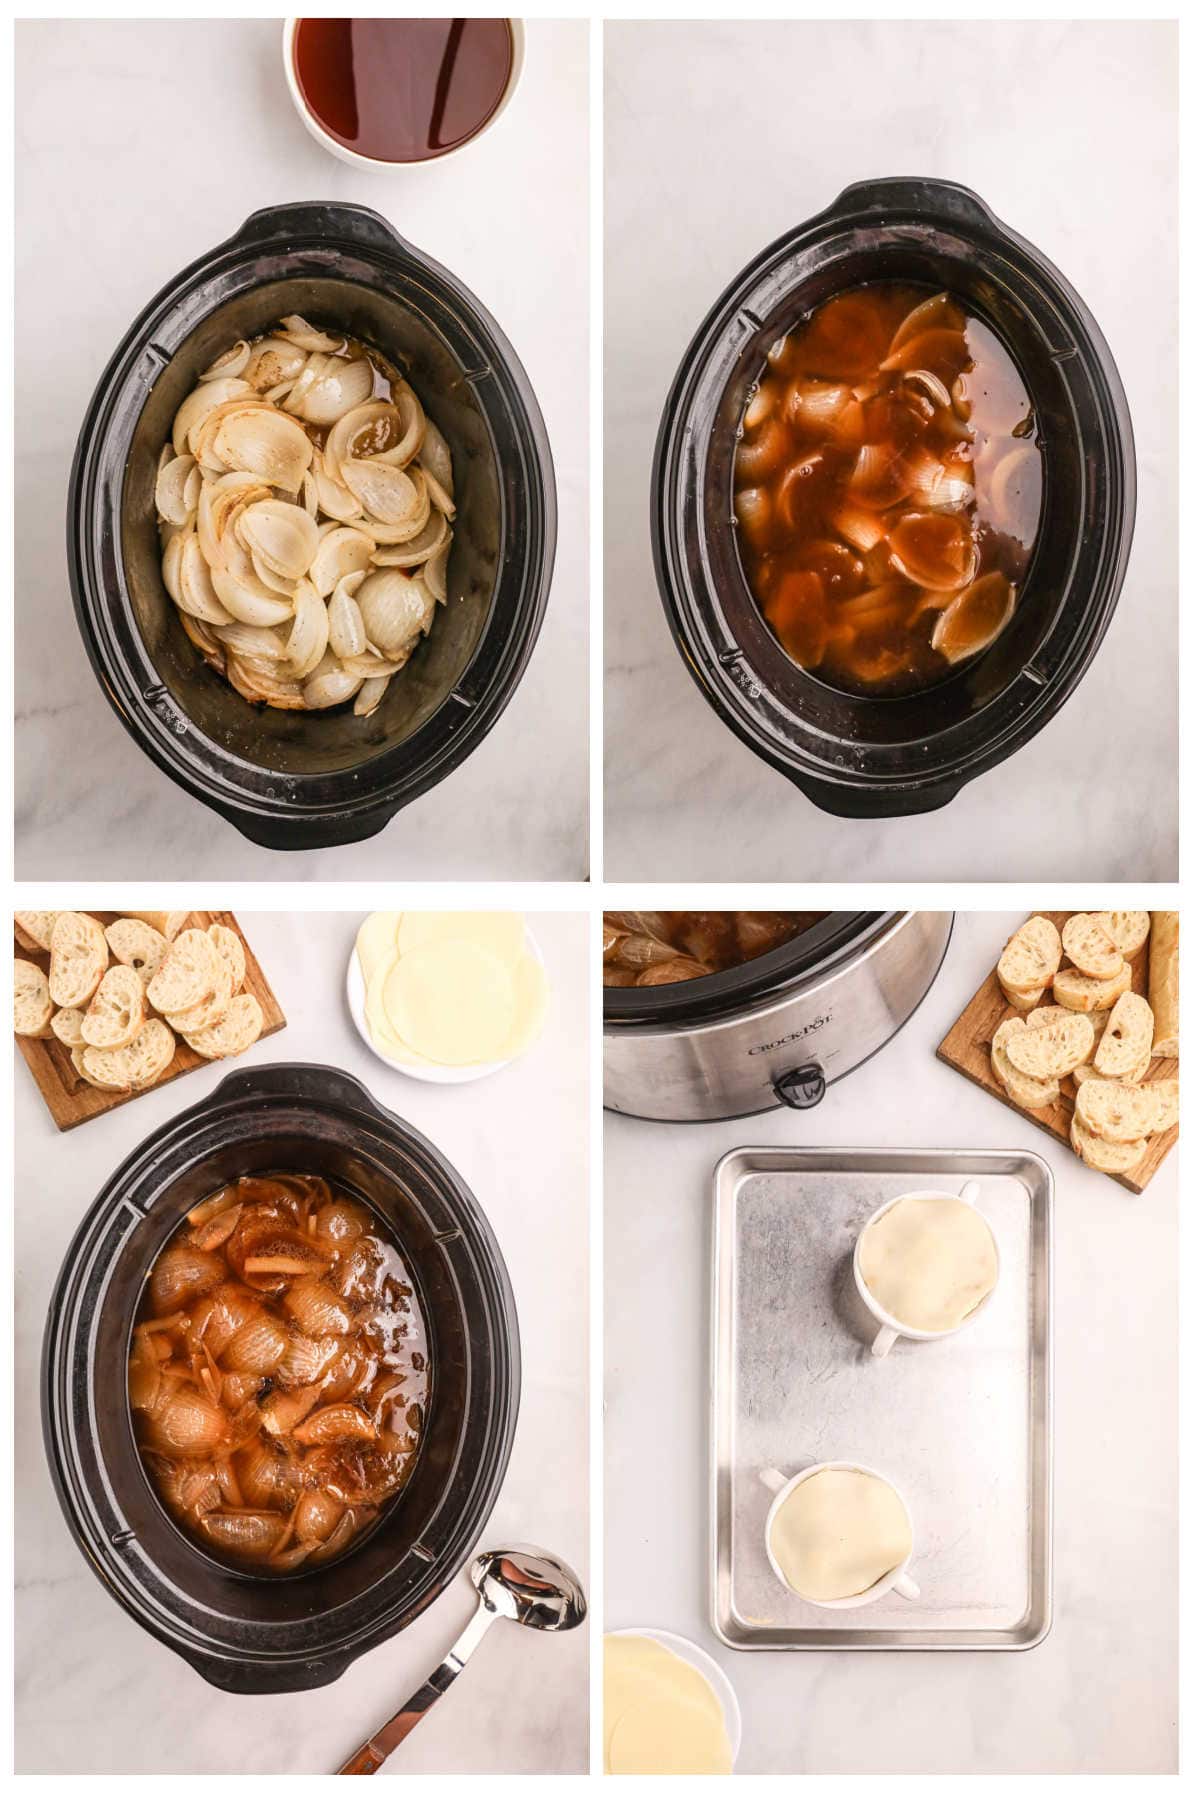 Step by step images showing how to make crock pot french onion soup.